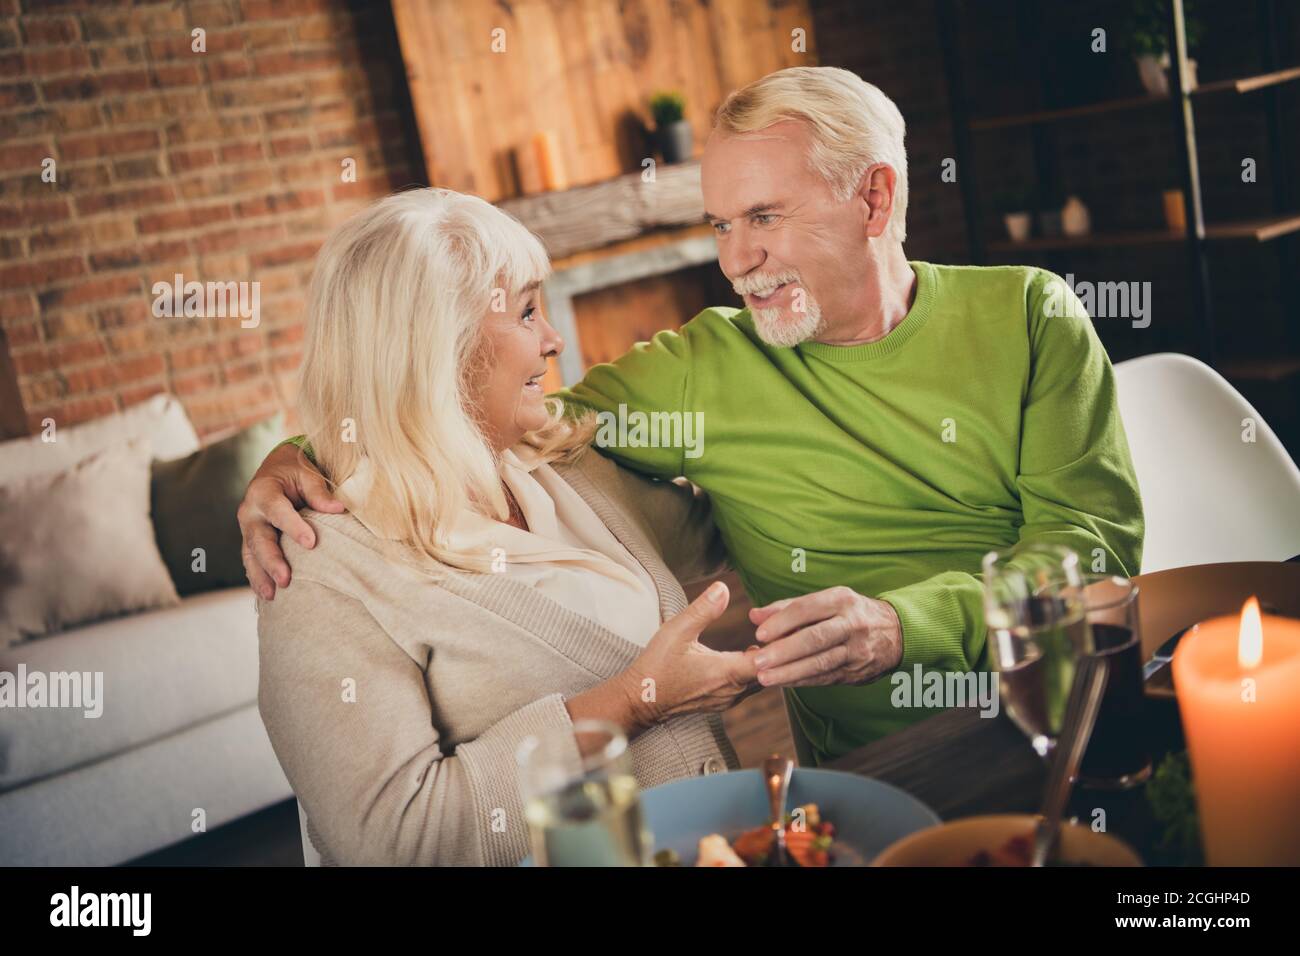 Portrait of his he her she nice adorable attractive lovely cheerful couple embracing eating luncheon meal domestic restaurant leisure talk speak at Stock Photo